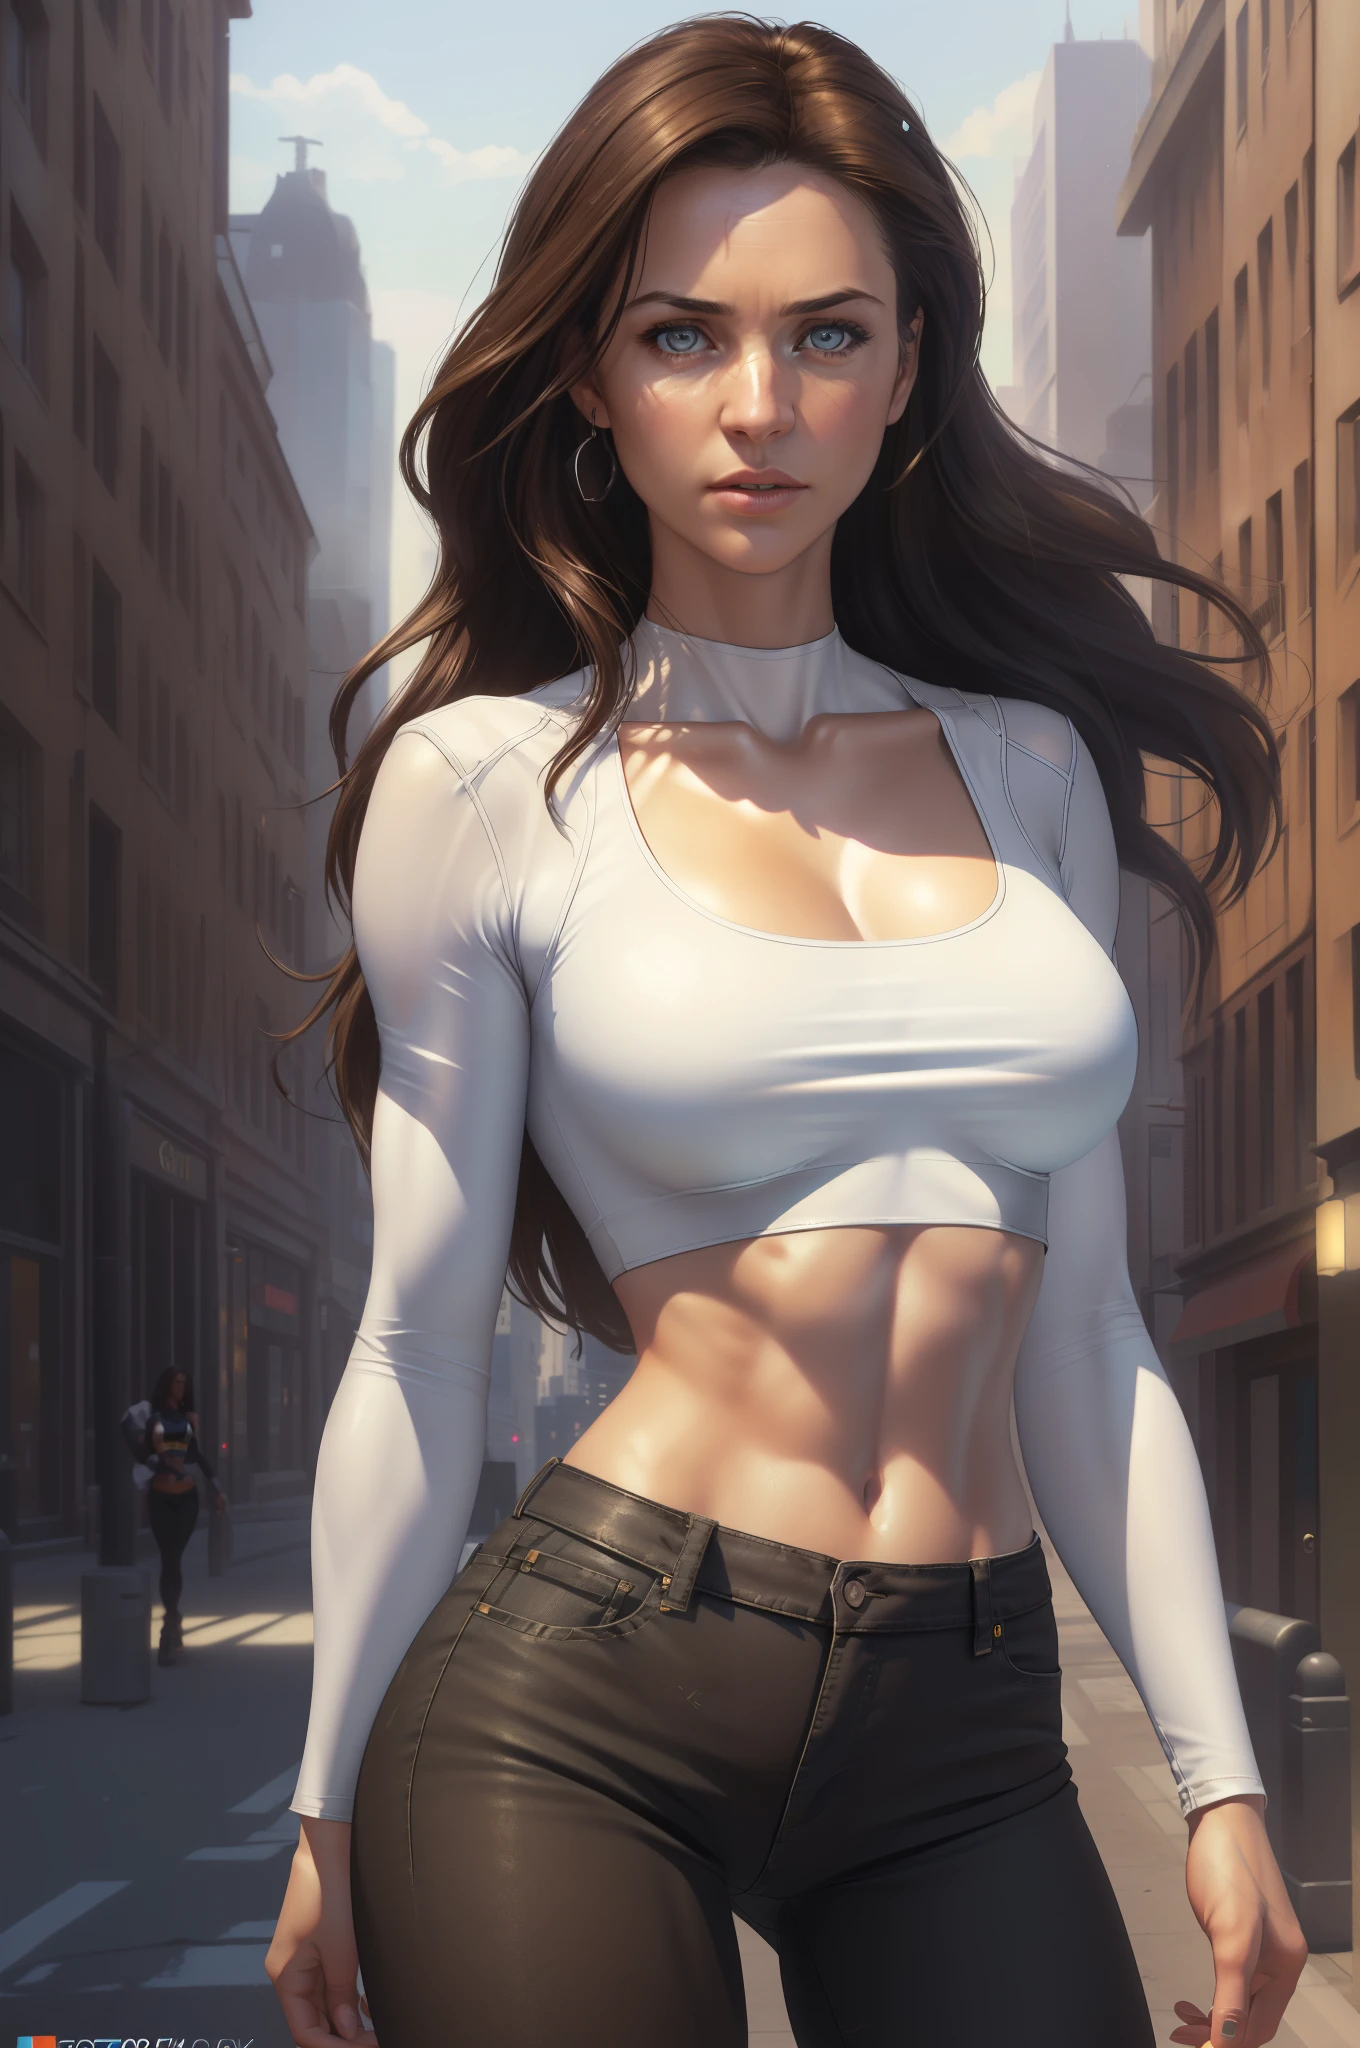 ((Realistic Lighting, Best Quality, 8K, Masterpiece: 1.3)), Clear Focus: 1.2, 1girl, Perfect Figure: 1.4, Slim Abs: 1.1, (Dark Brown Hair)), (White Crop Top: 1.4), (Outdoor, Night: 1.1), City Streets, Super Beautiful Face, Beautiful Eyes, Double Eyelids, Bare Chest